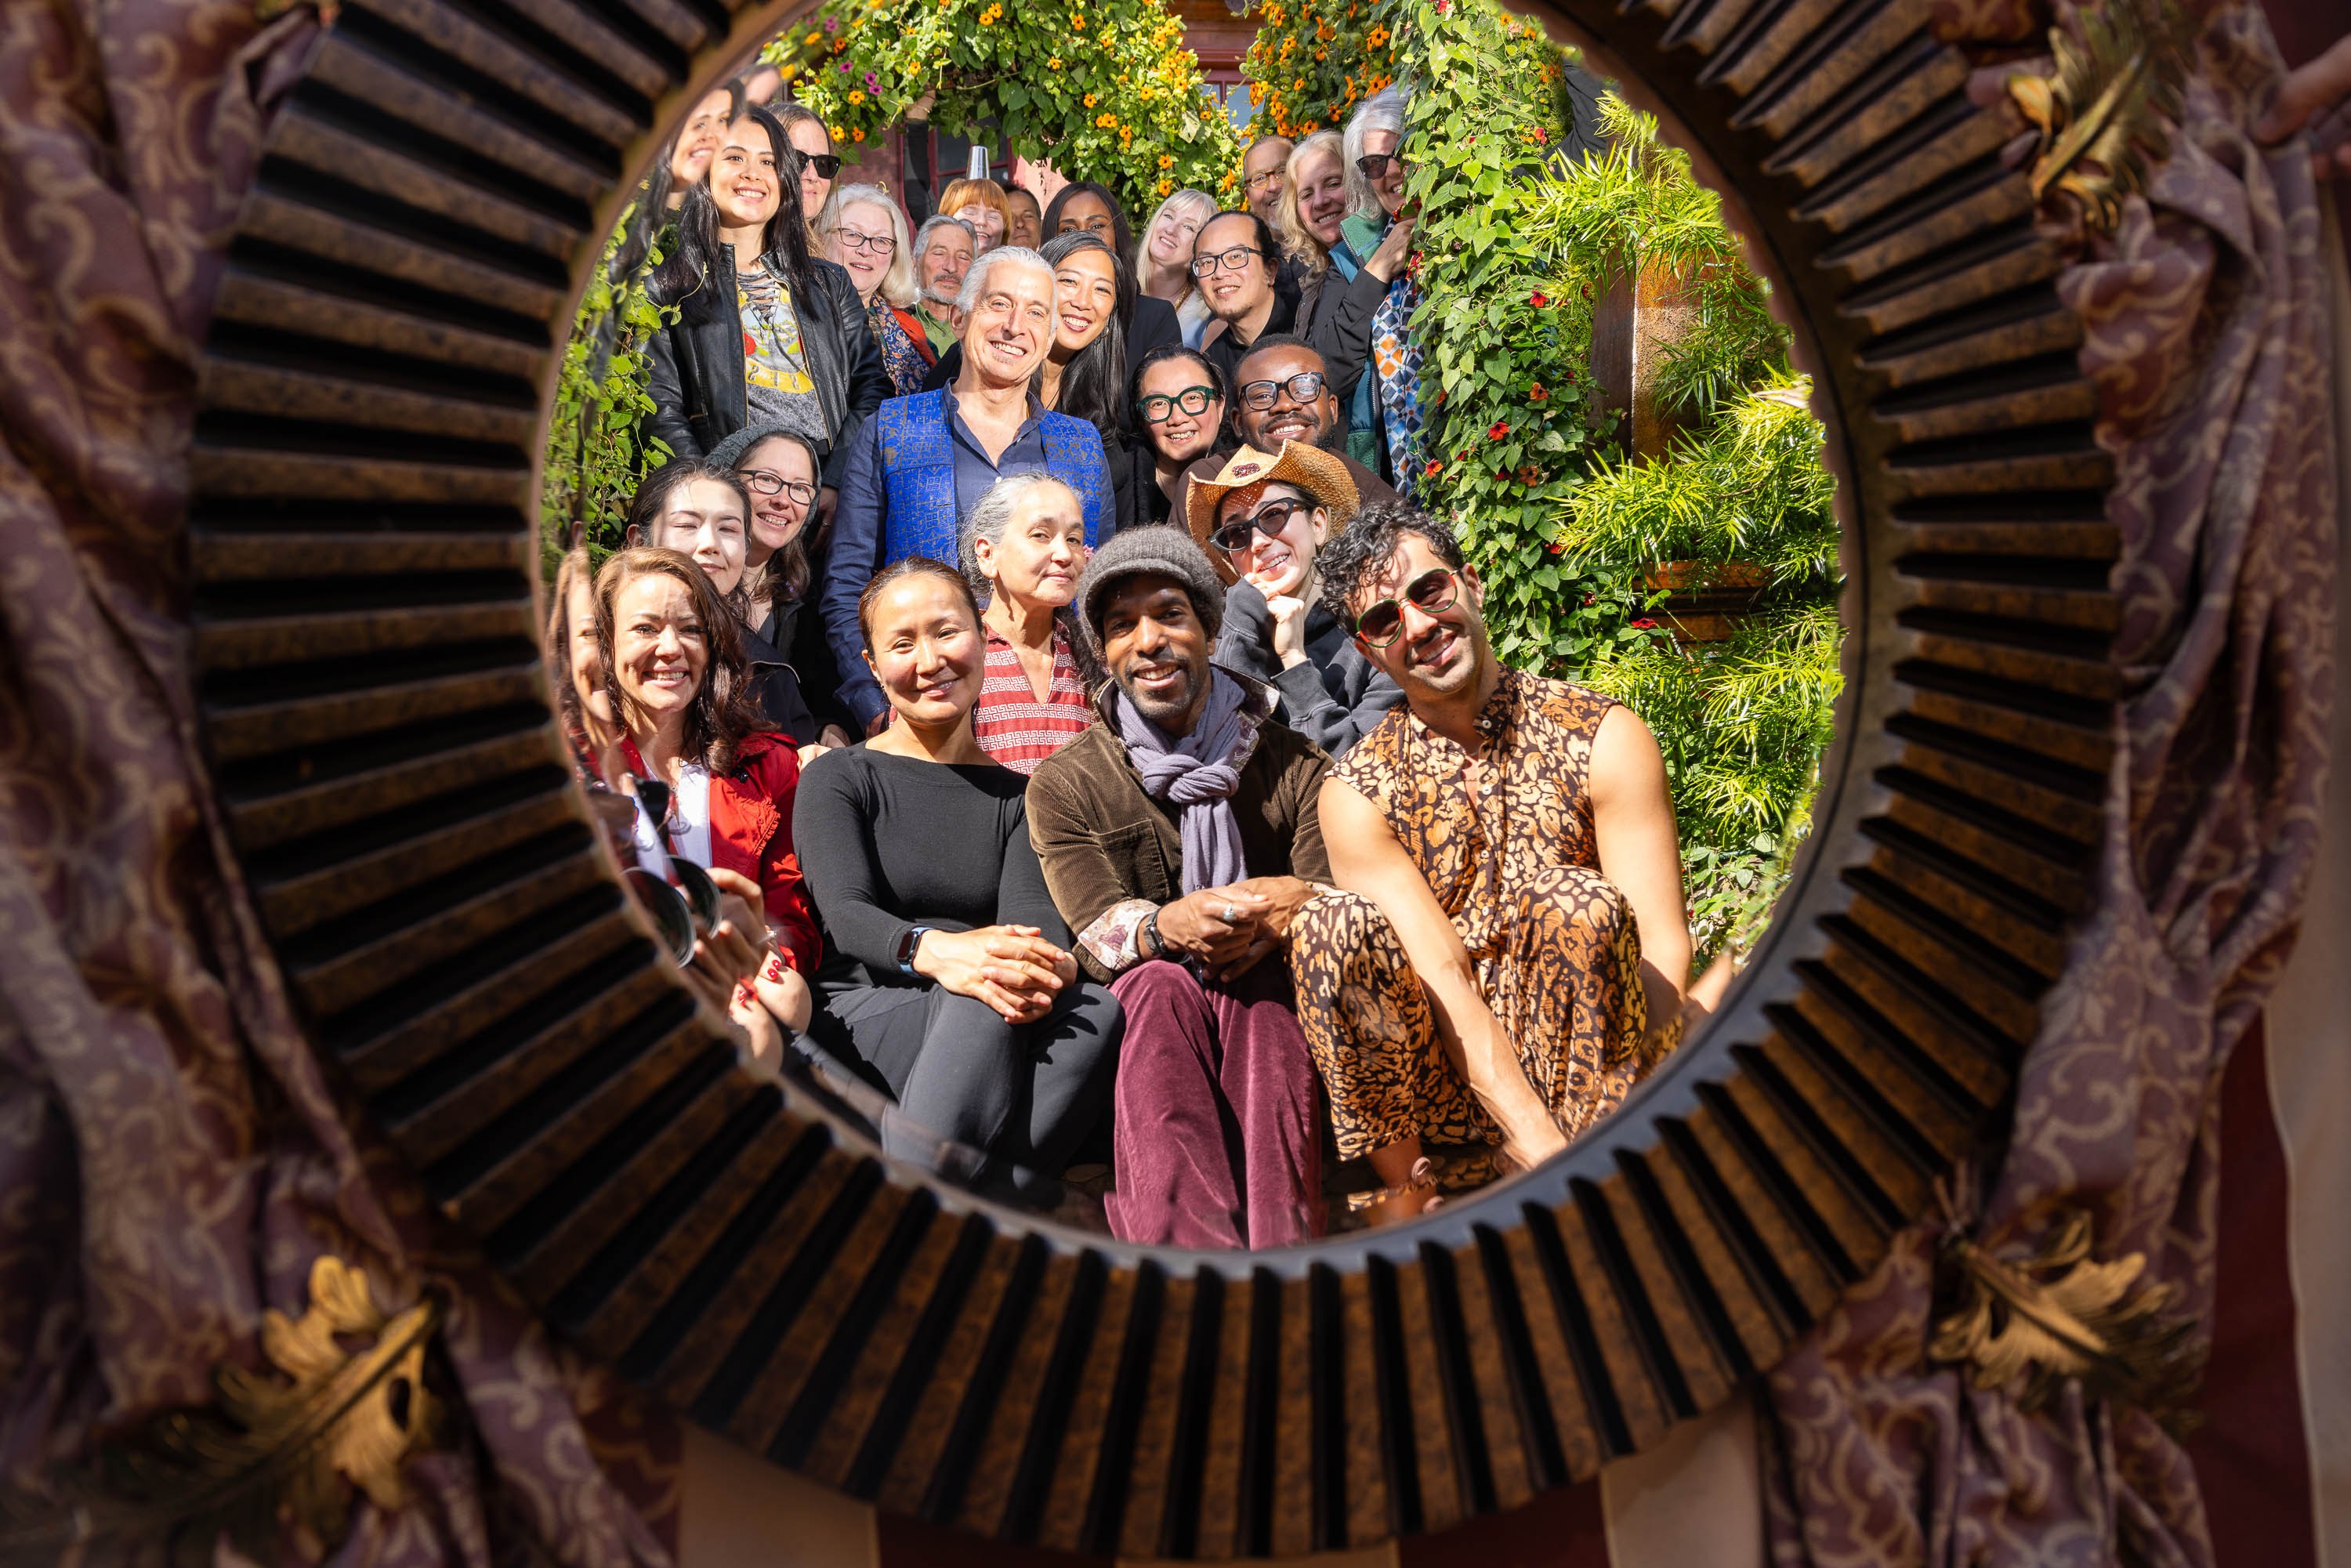 Group of smiling people seen through an ornate circular frame, surrounded by lush greenery.